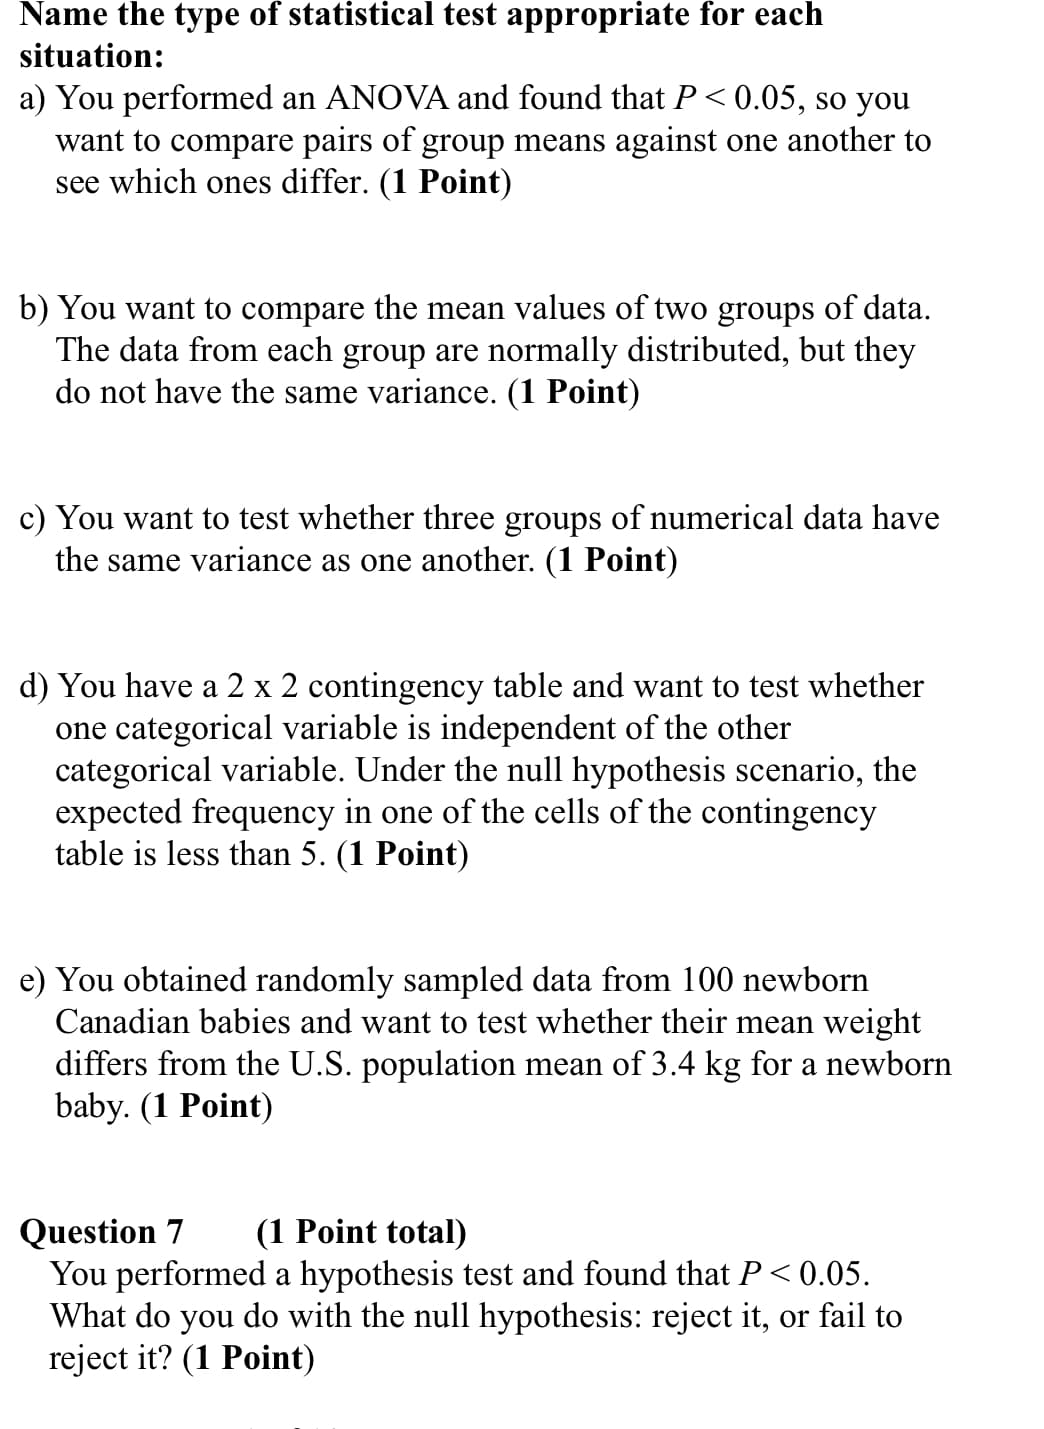 Name the type of statistical test appropriate for each
situation:
a) You performed an ANOVA and found that P<0.05, so you
want to compare pairs of group means against one another to
see which ones differ. (1 Point)
b) You want to compare the mean values of two groups of data.
The data from each group are normally distributed, but they
do not have the same variance. (1 Point)
c) You want to test whether three groups of numerical data have
the same variance as one another. (1 Point)
d) You have a 2 x 2 contingency table and want to test whether
one categorical variable is independent of the other
categorical variable. Under the null hypothesis scenario, the
expected frequency in one of the cells of the contingency
table is less than 5. (1 Point)
e) You obtained randomly sampled data from 100 newborn
Canadian babies and want to test whether their mean weight
differs from the U.S. population mean of 3.4 kg for a newborn
baby. (1 Point)
Question 7 (1 Point total)
You performed a hypothesis test and found that P<0.05.
What do you do with the null hypothesis: reject it, or fail to
reject it? (1 Point)